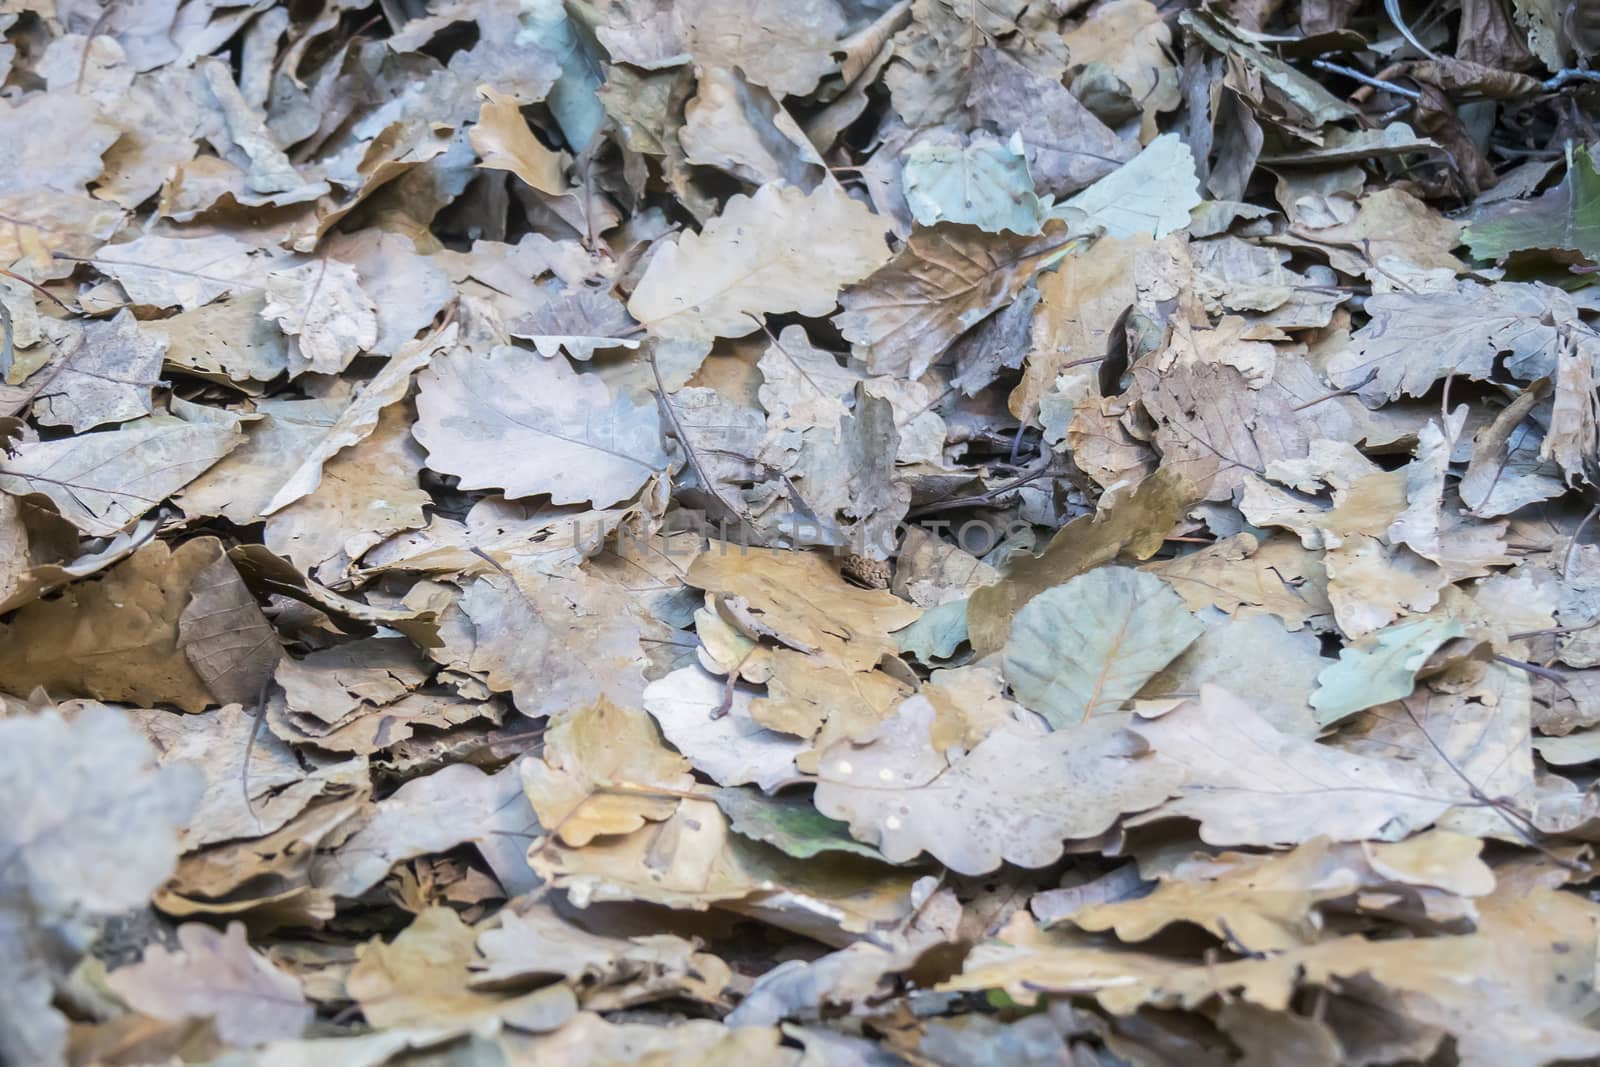 Bed of Autumnal leaves fallen on ground